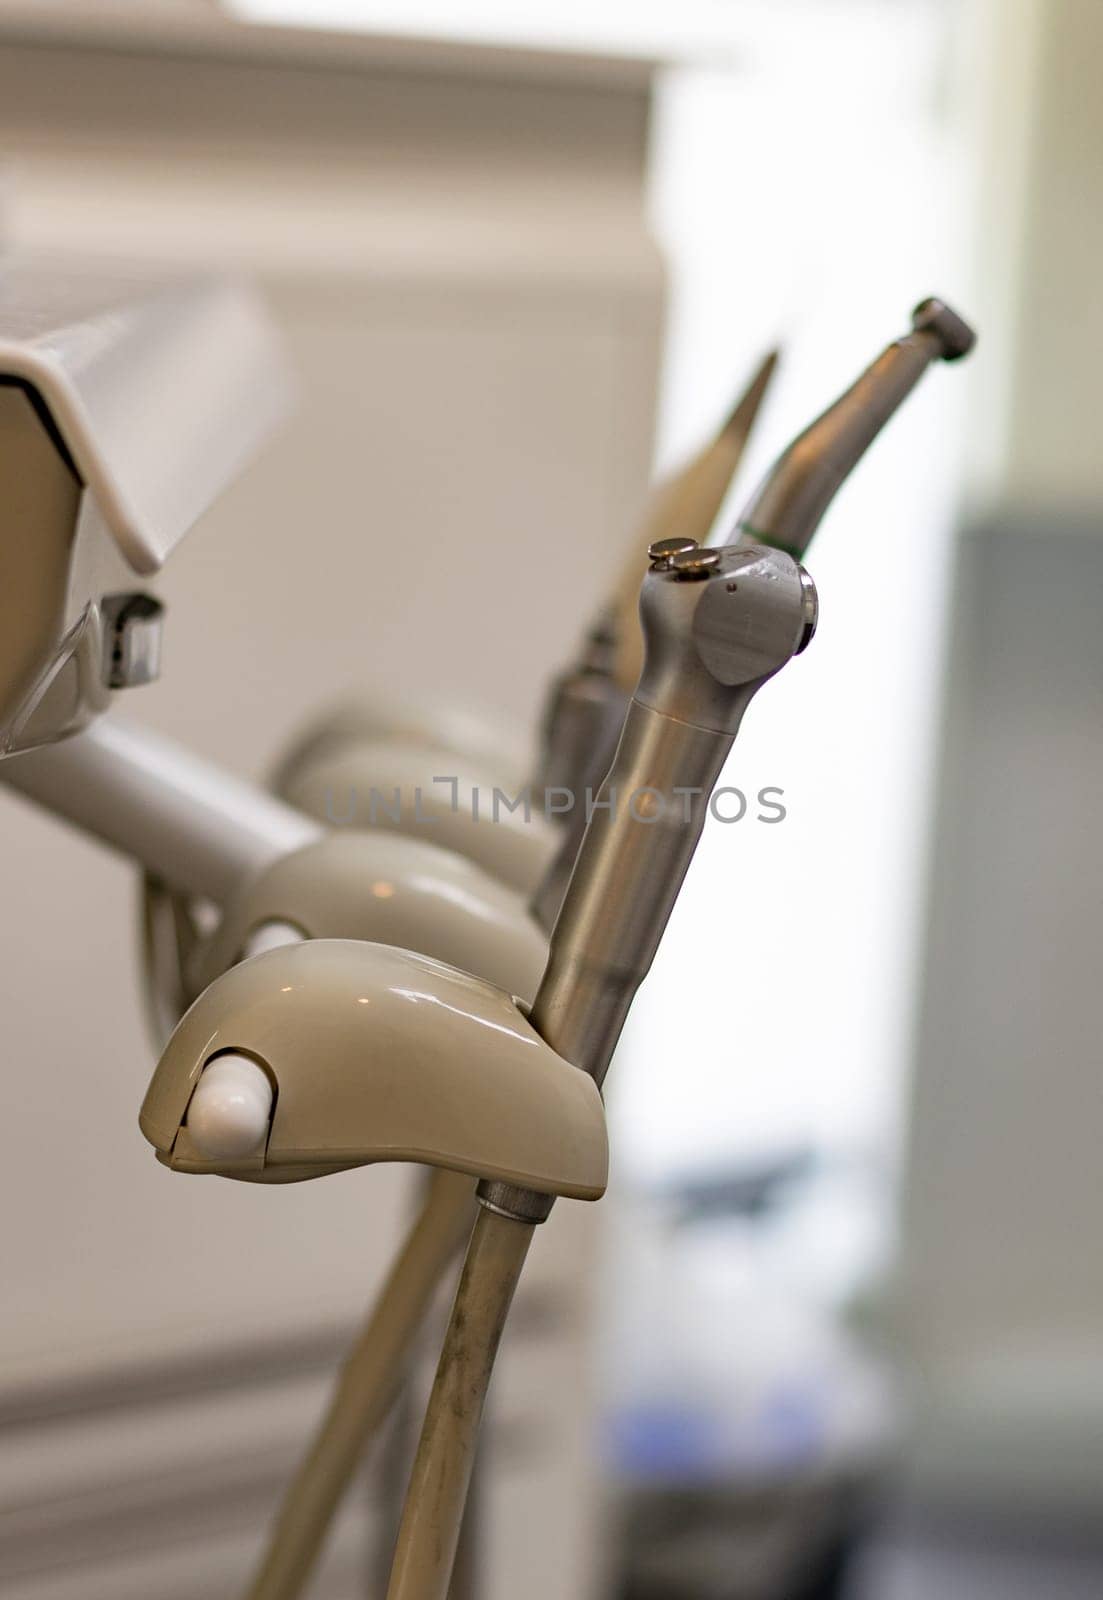 Dental oral drilling and rinsing instruments in the dentist's office in the hospital, close-up side view.